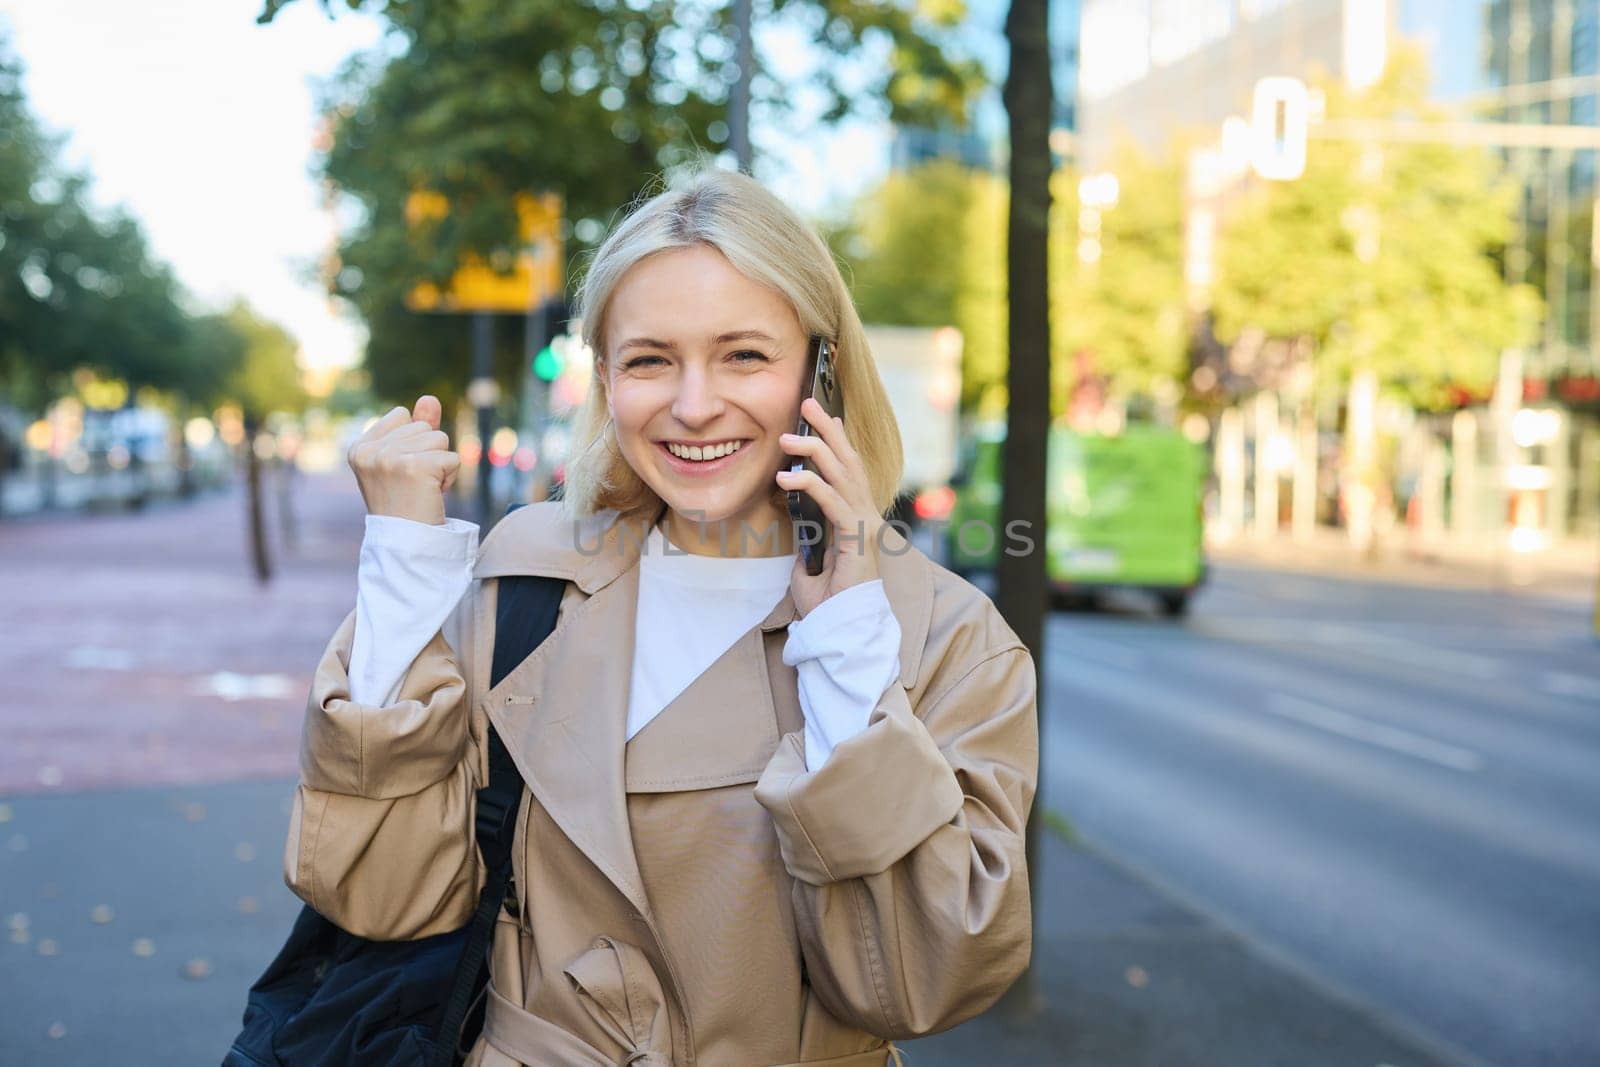 Close up portrait of beautiful young woman, blonge girl walking on street with mobile phone, chatting with friend, has happy face expression while talking over cellphone on her way.